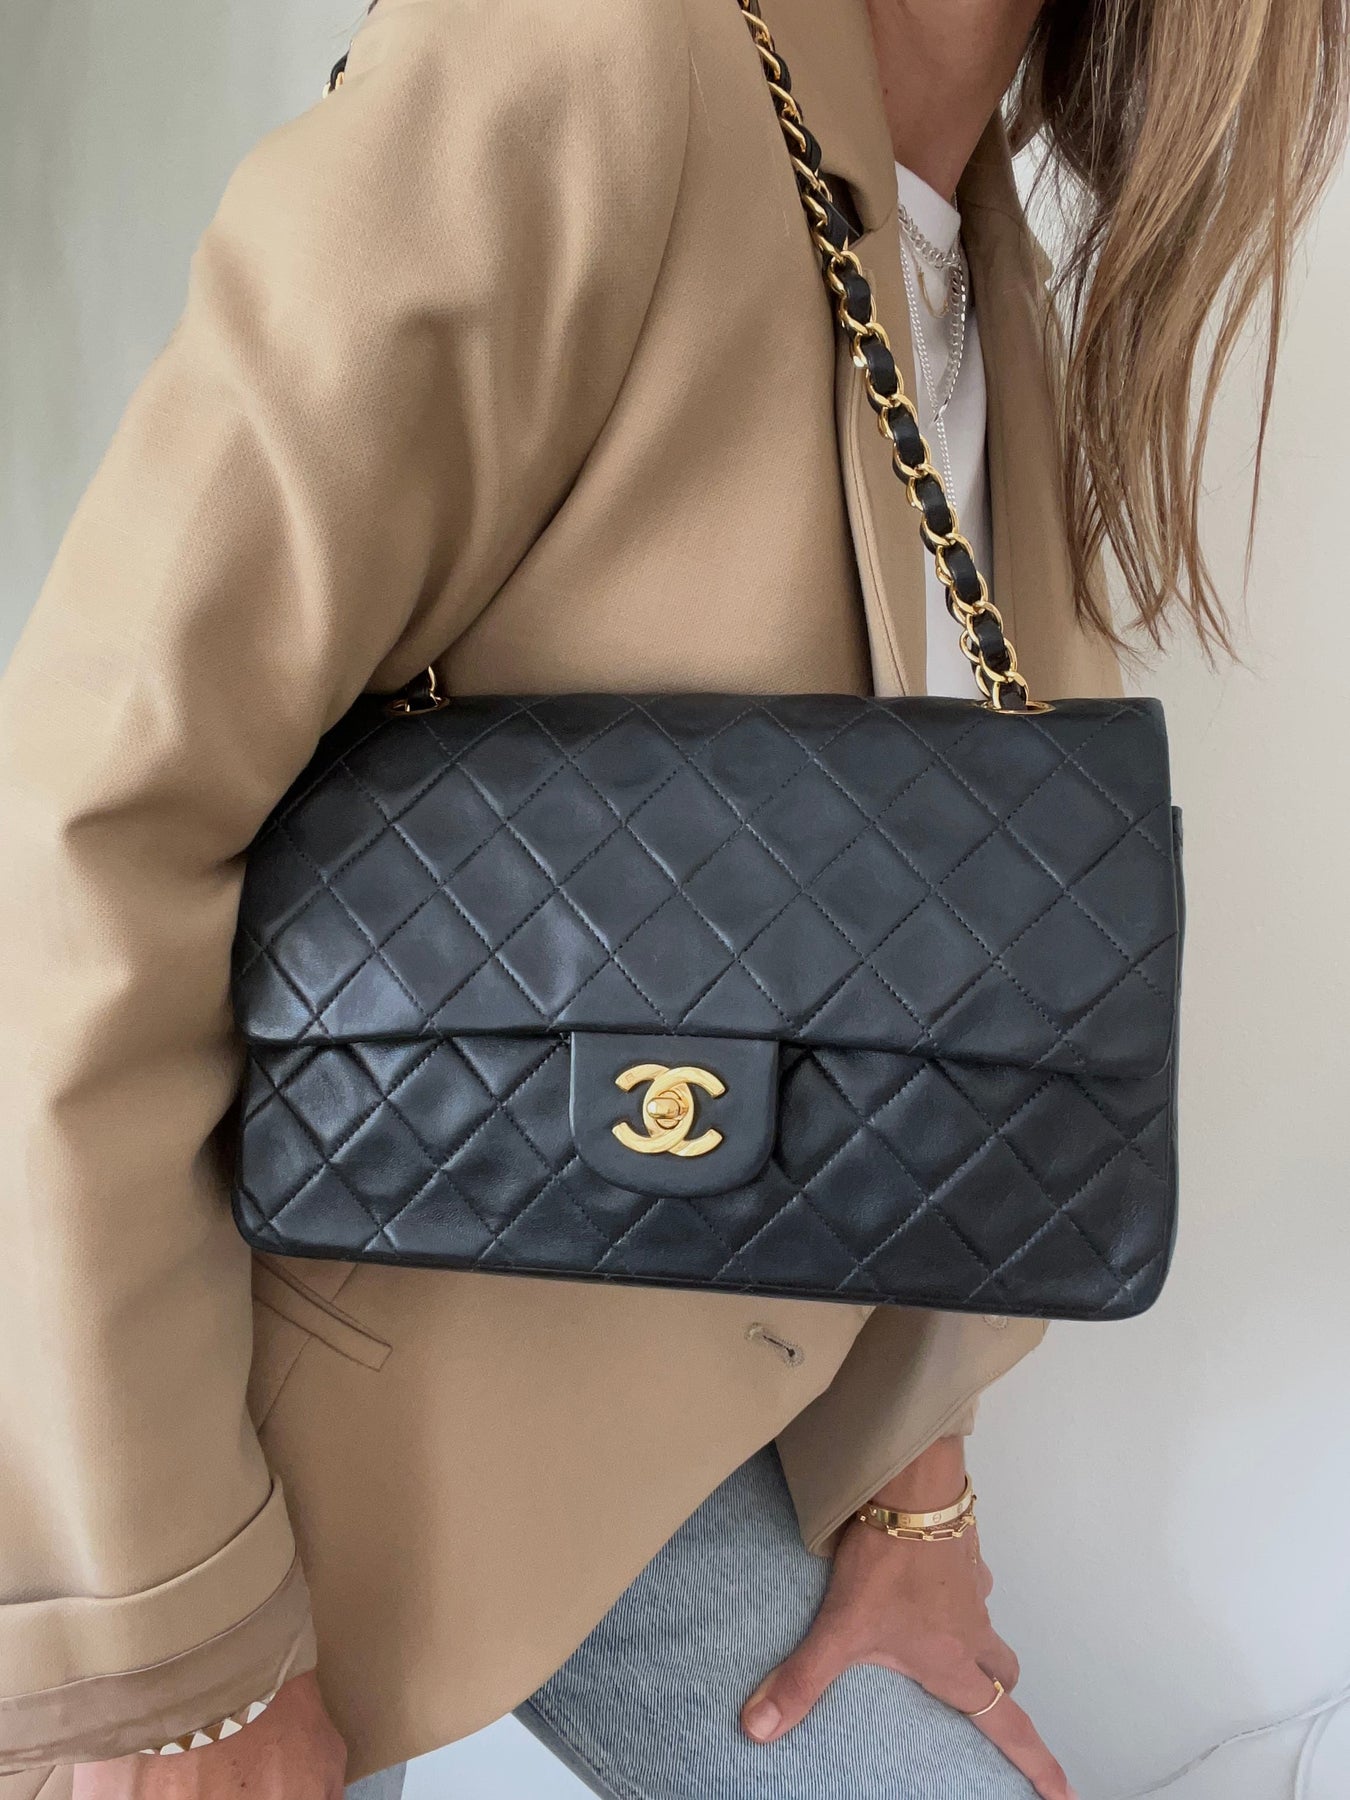 How did Louis Vuitton and Chanel become so expensive? - Quora